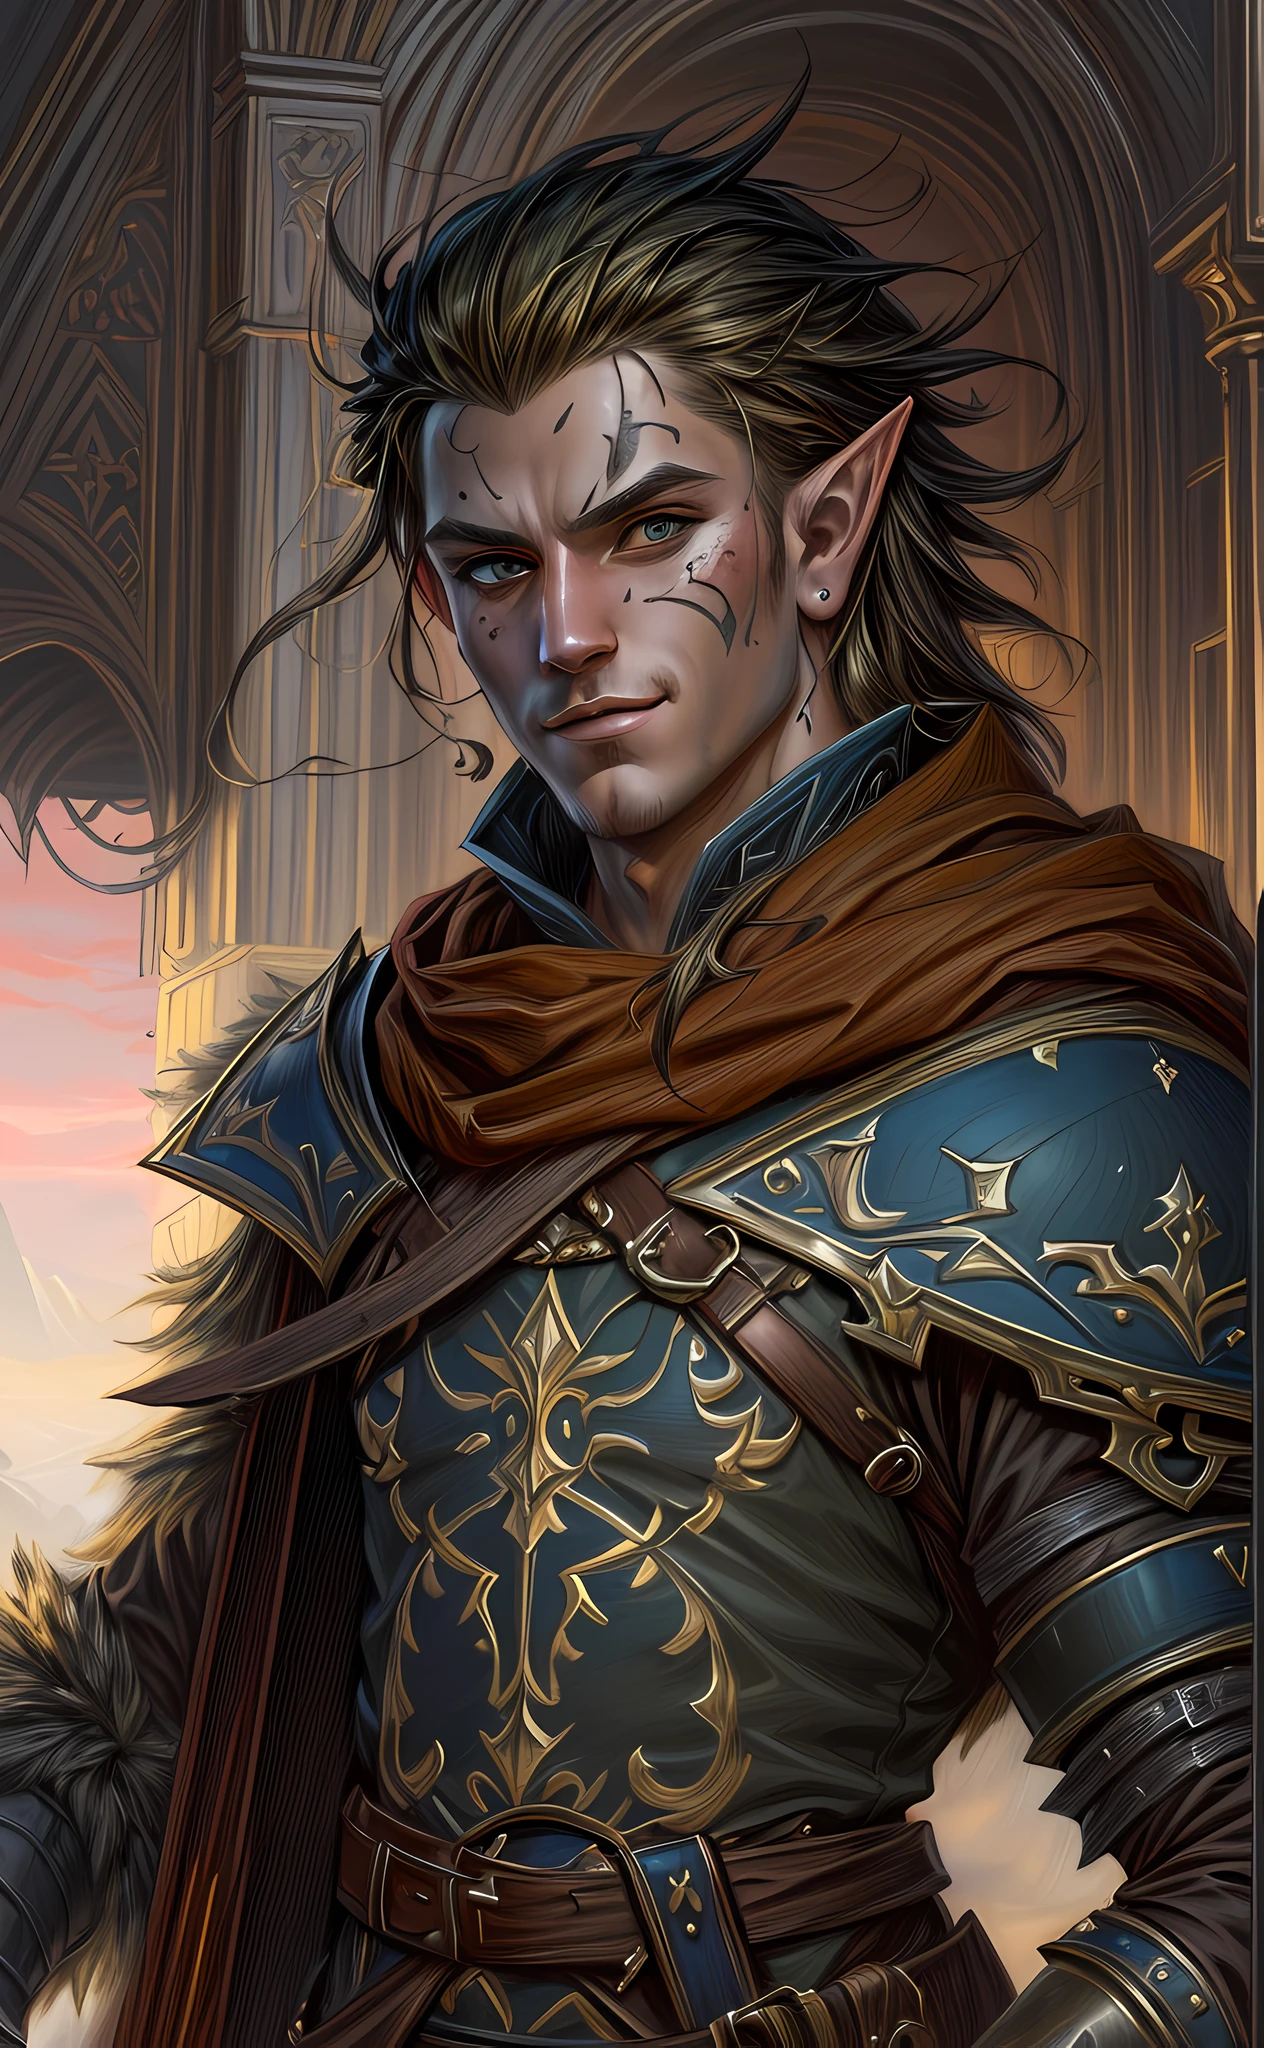 dark fantasy art, dnd art, dark RPG art, wide shot, (masterpiece:1.3), magv1ll, half elf bard in a fantasy street, full body, intense details, highly detailed, photorealistic, best quality, highres, portrait of 1(male: 1.4) half elf (fantasy art, Masterpiece, best quality: 1half elf, male, thin, pale skin, (dirt on face: 1.2), intense details facial detail (gritty fantasy art, Masterpiece, best quality: 1.4) bard, exquisite beauty, (blond hair: 1.3), (smirking in arrogance: 1.2), (dirt on face: 1.3), (grime on face: 1.3) (small pointed ears: 1.3), intense azure eyeantasy art, Masterpiece, best quality: 1.3) holding a (small lyre: 1.4) (fantasy art, Masterpiece, best quality: 1.4) wearing heavy (heavy armor, wearing) CM-Beautiful_armor, wearing leather boots, wearing a cloak, a sword slung on his back (fantasy art, Masterpiece, best quality: 1.3), smiling an arrogant smile, standing in (gritty: 1.3) fantasy street, there are (dark red clouds: 1.3) , (dark yellows clouds: 1.3) above, sense of gloom, sense of dread, depth of field, reflection light, high details, best quality, 16k, [ultra detailed], masterpiece, best quality, (extremely detailed), dynamic angle, ultra wide shot, photorealistic, RAW, fantasy art, dnd art, fantasy art, realistic art